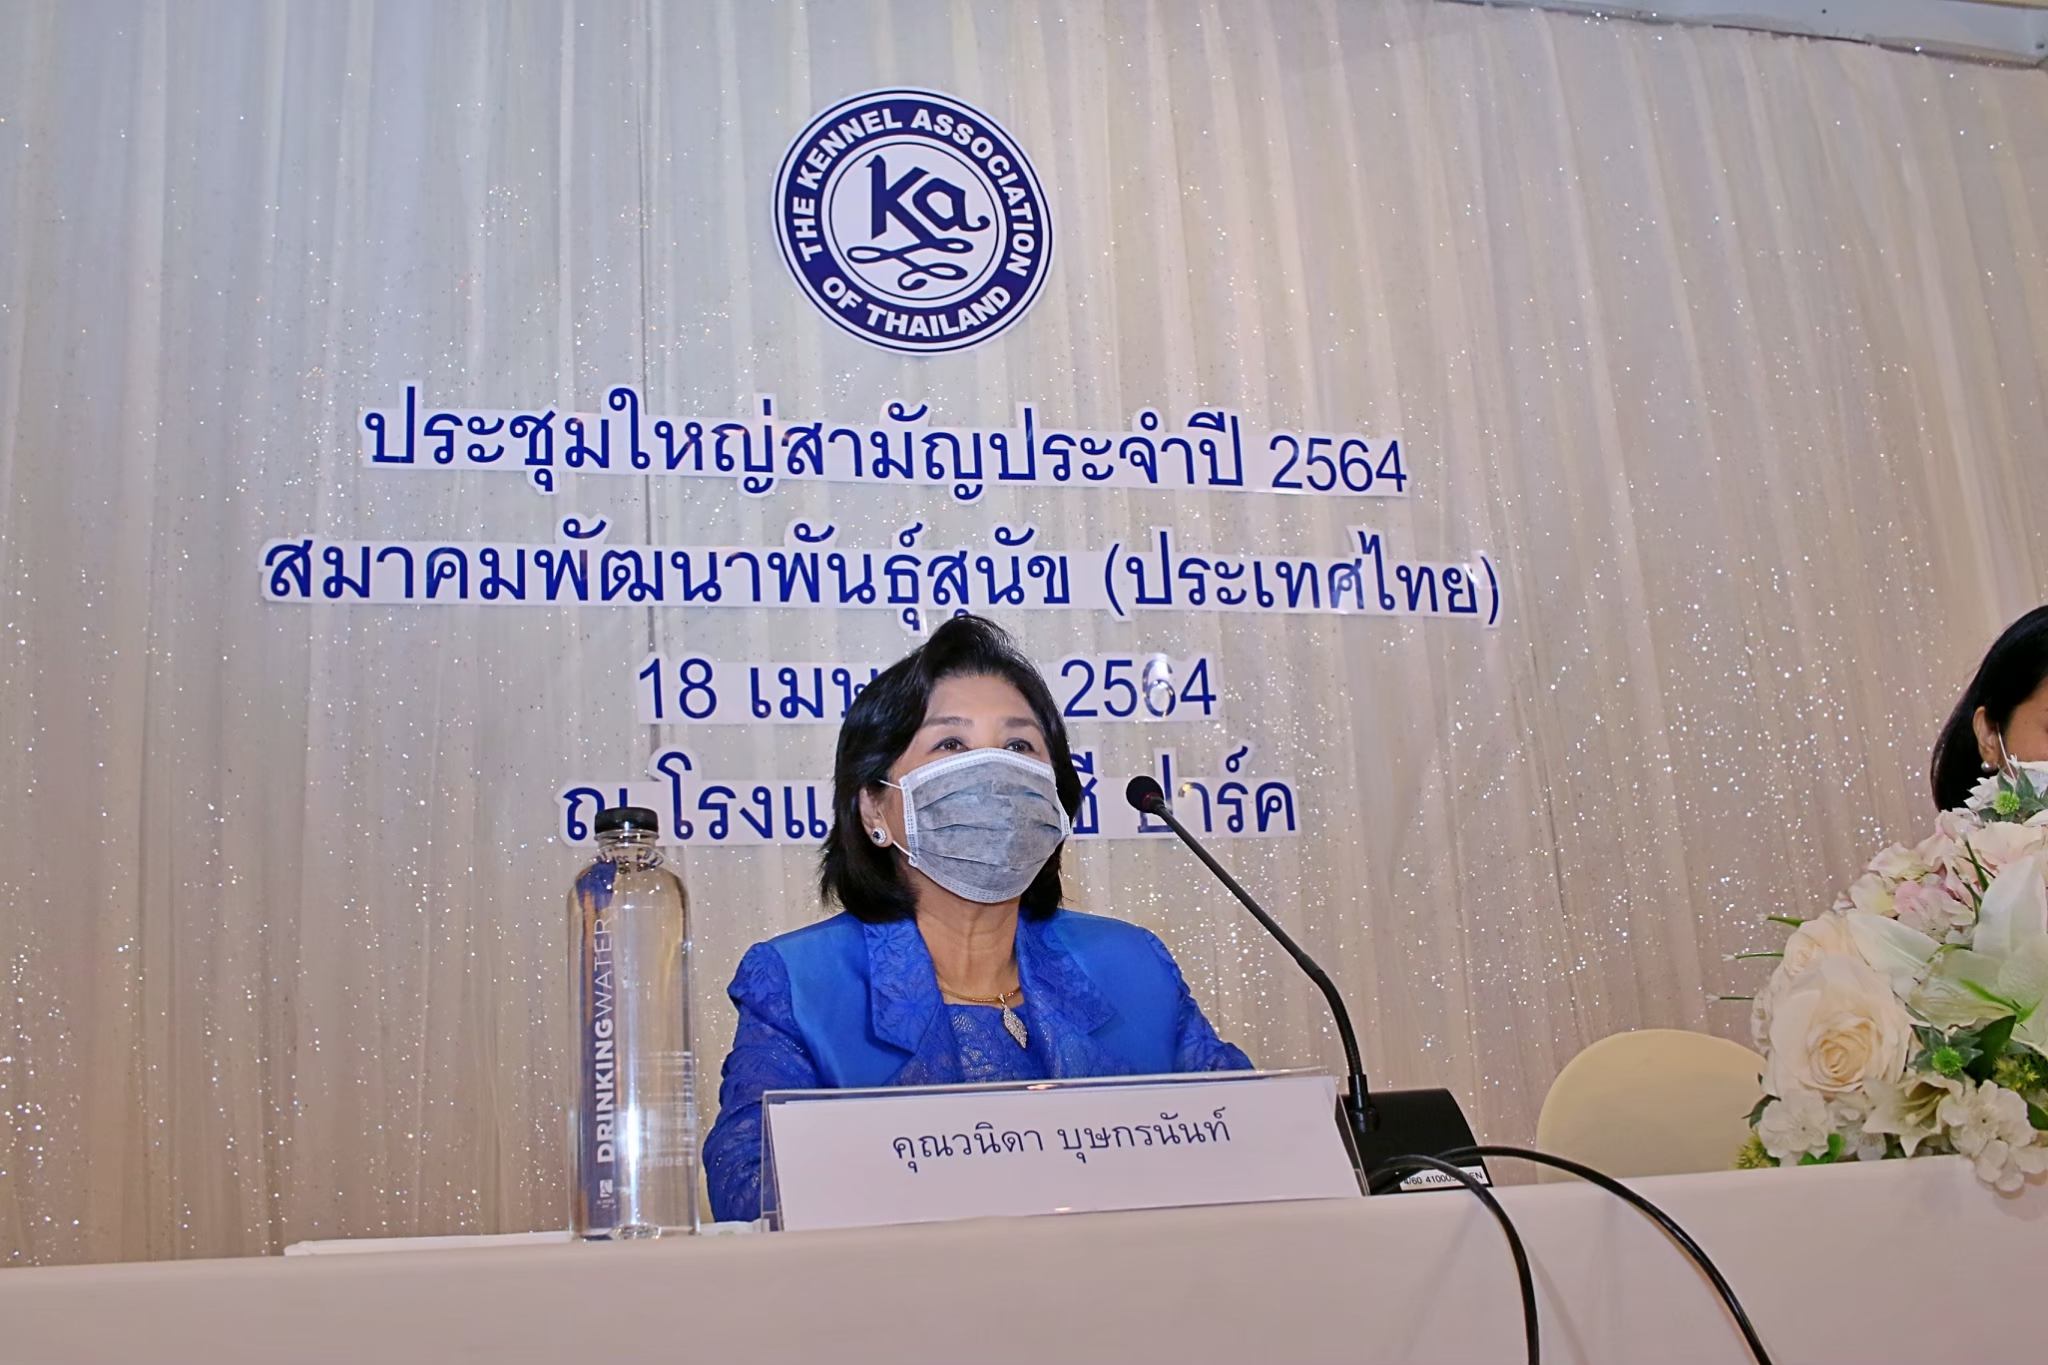 The General Meeting of The Kennel Association of Thailand 2021